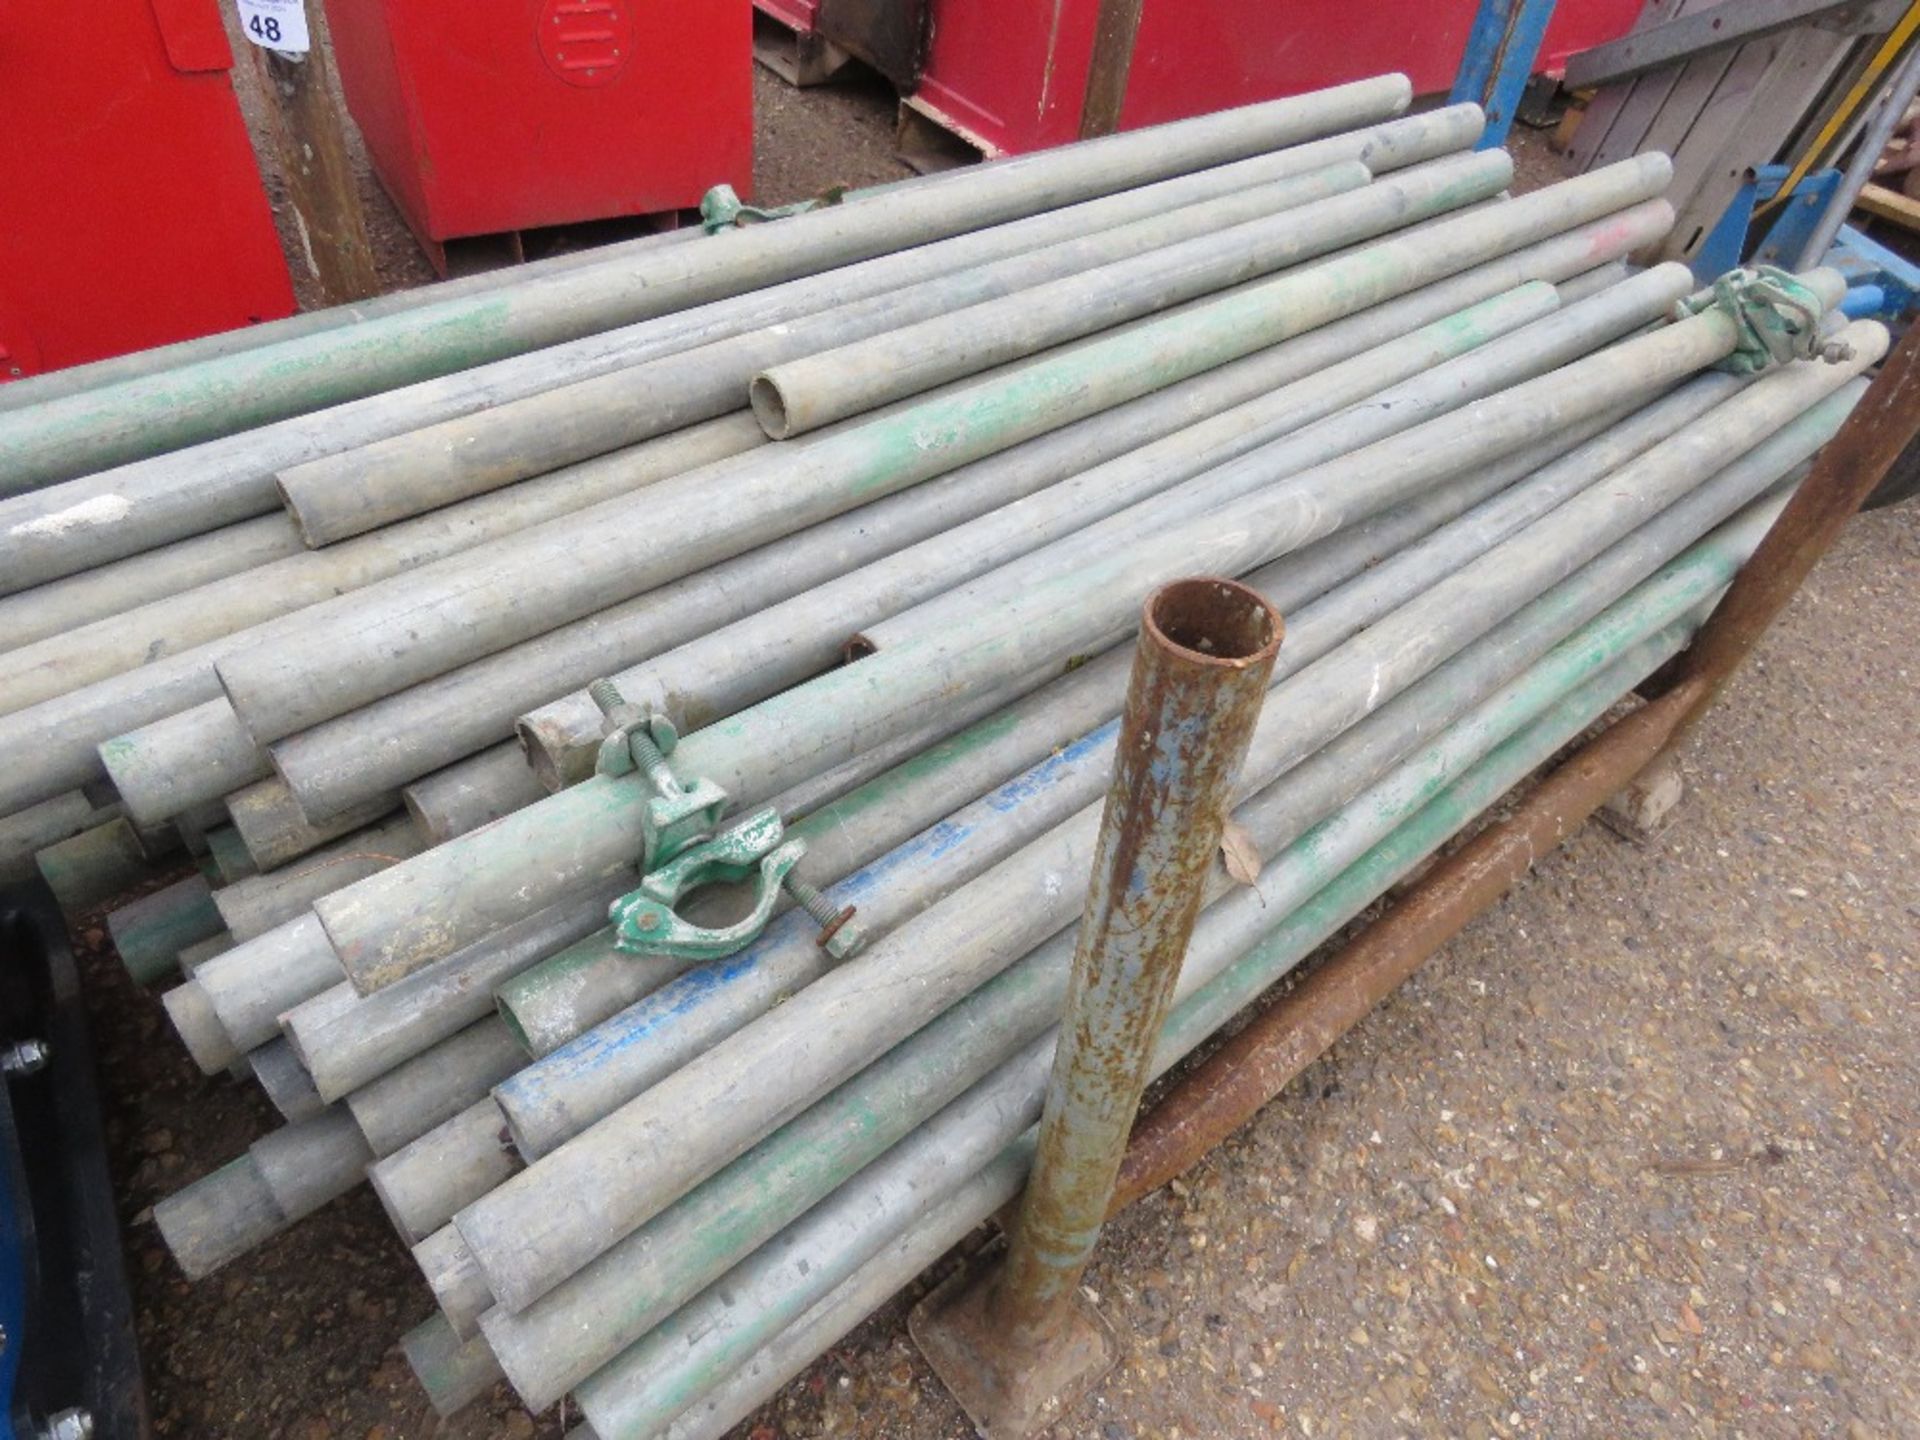 STILLAGE CONTAINING A LARGE QUANTITY OF SHORT LENGTH SCAFFOLD TUBES 3-5FT LENGTH APPROX.